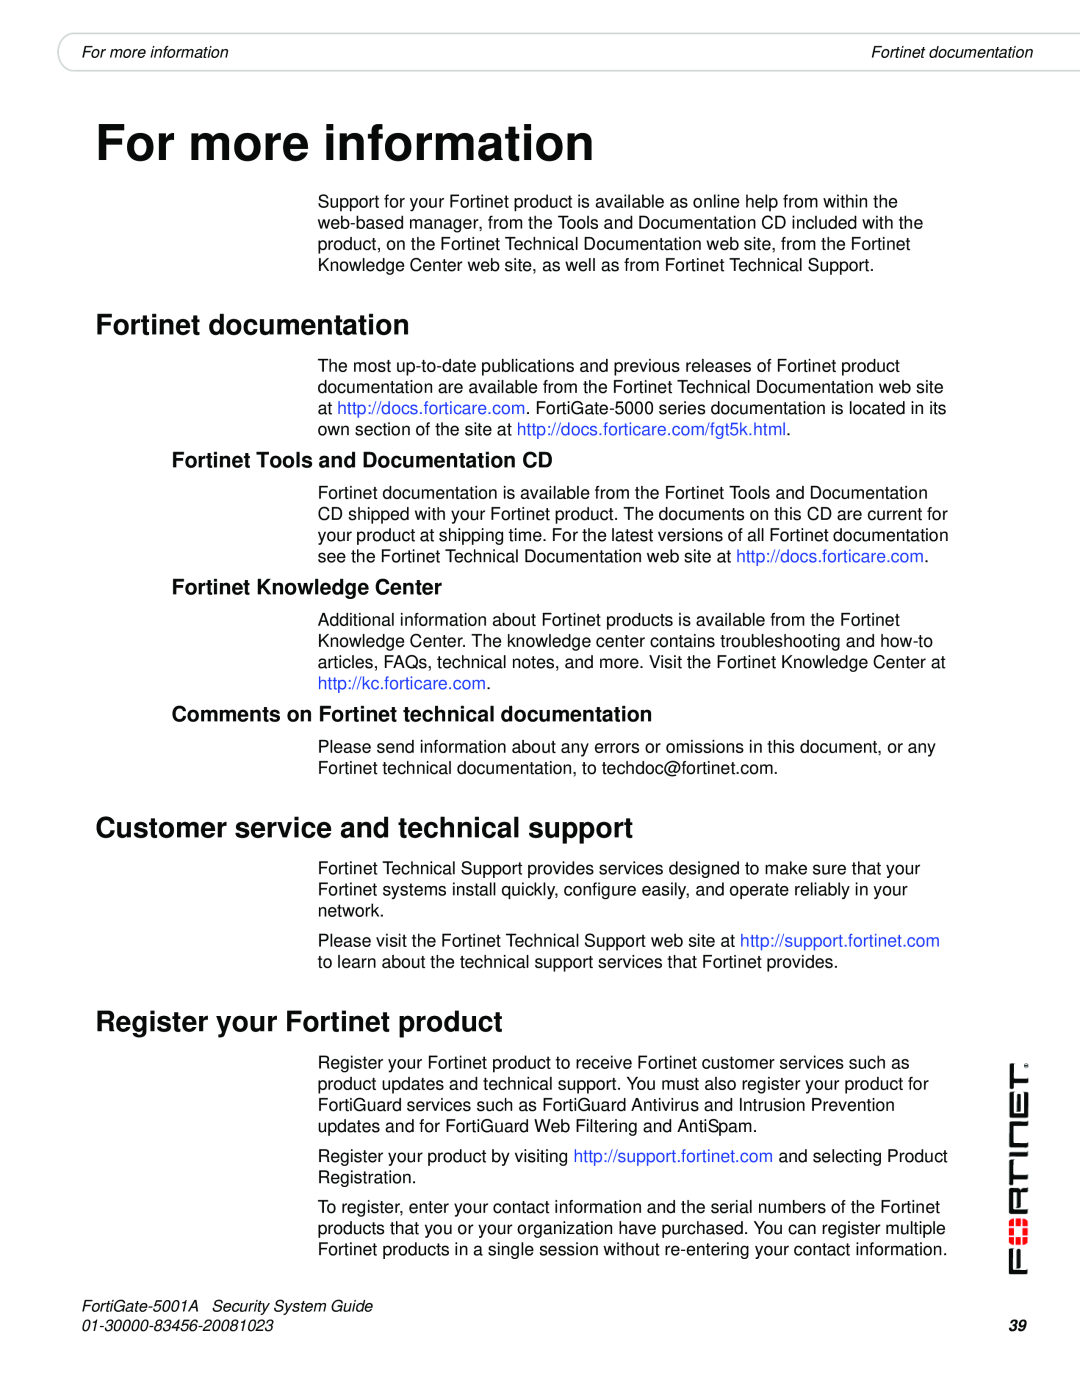 Fortinet 5001A-SW, 5001A-DW manual For more information, Fortinet documentation, Customer service and technical support 